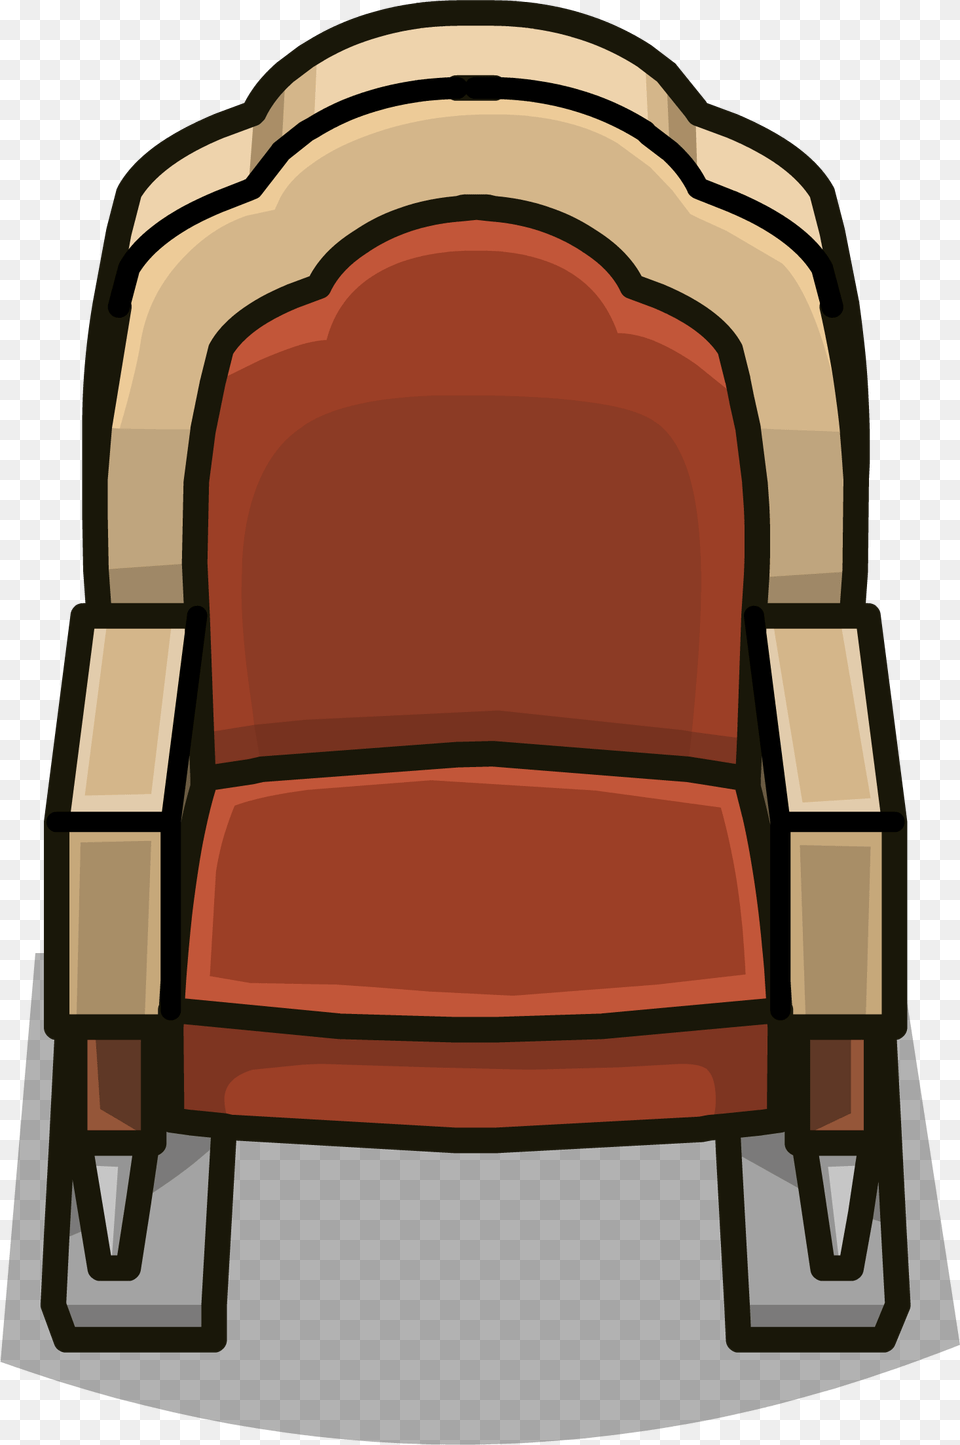 Official Club Penguin Online Wiki Butaca, Furniture, Chair, Armchair, Throne Free Png